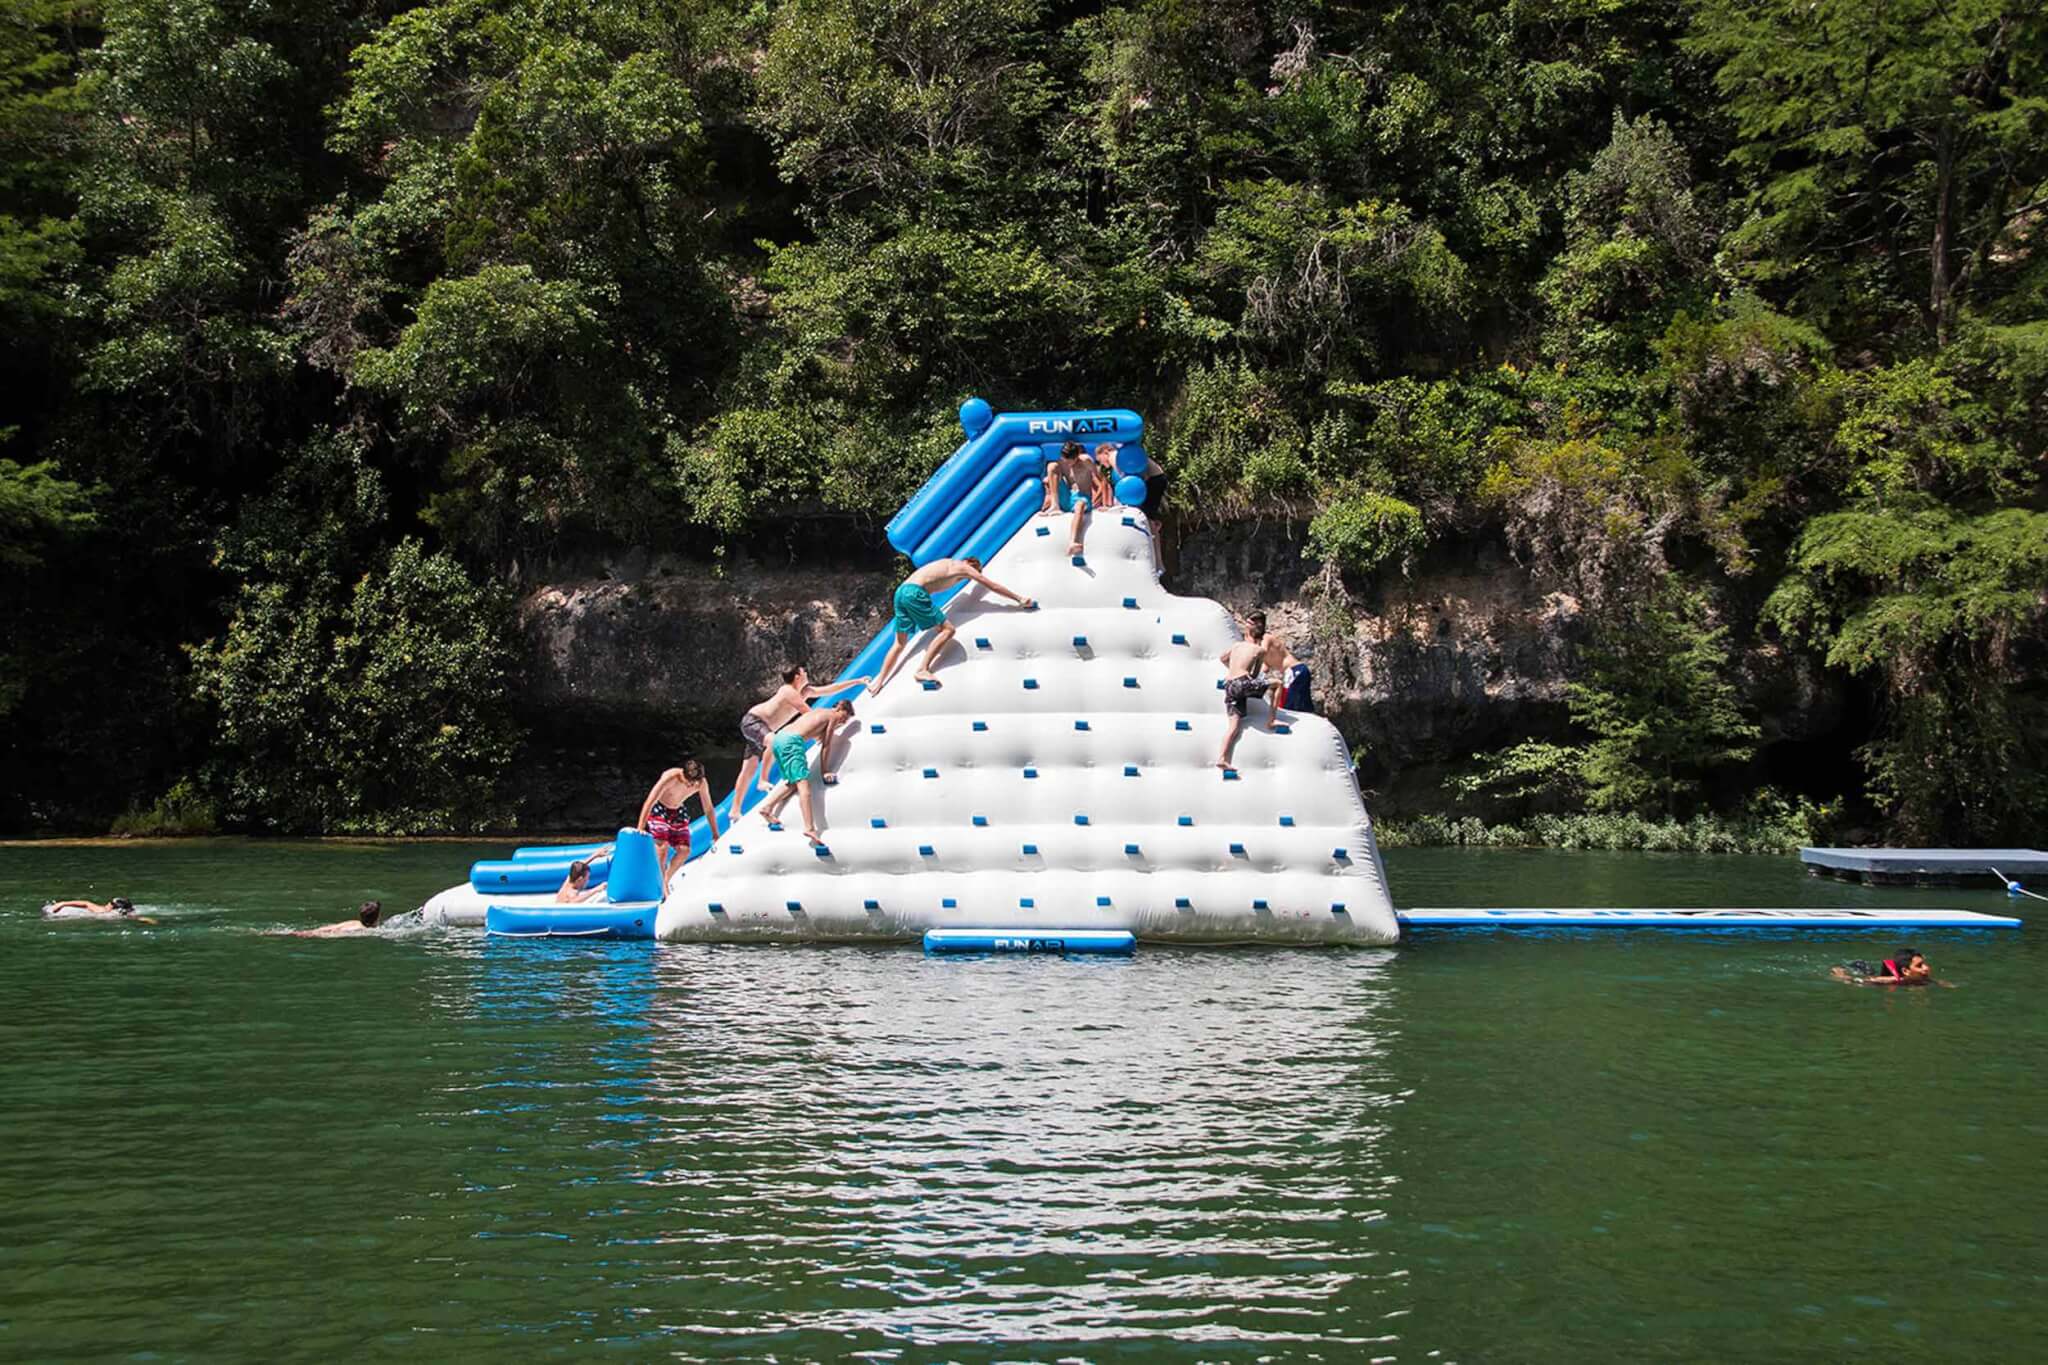 A Half-ton of Inflatable Summer Fun